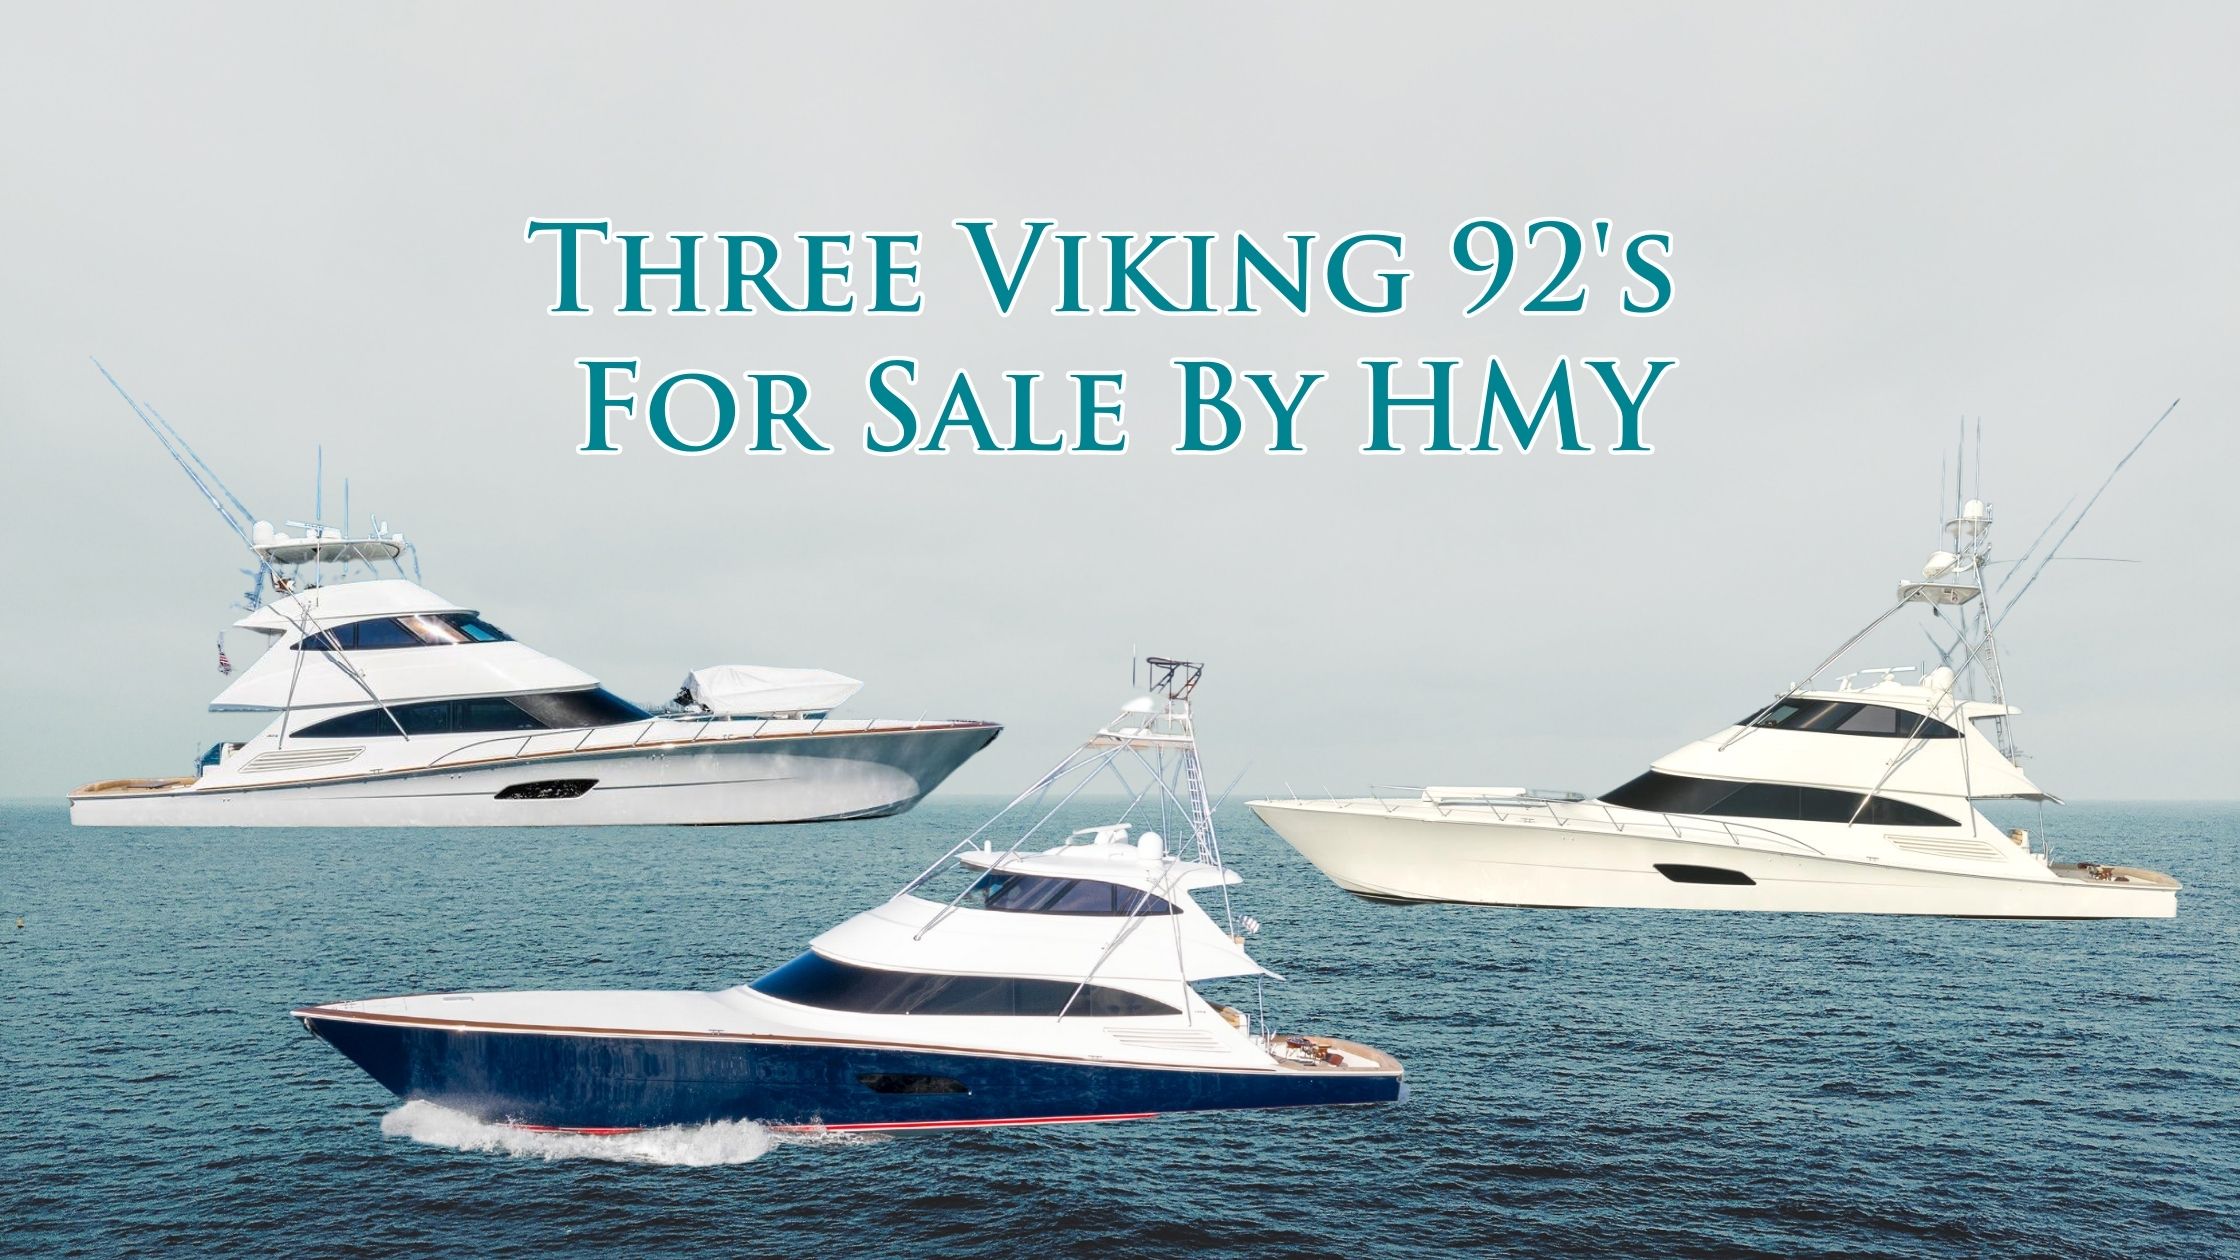 3 Viking 92’s For Sale By HMY